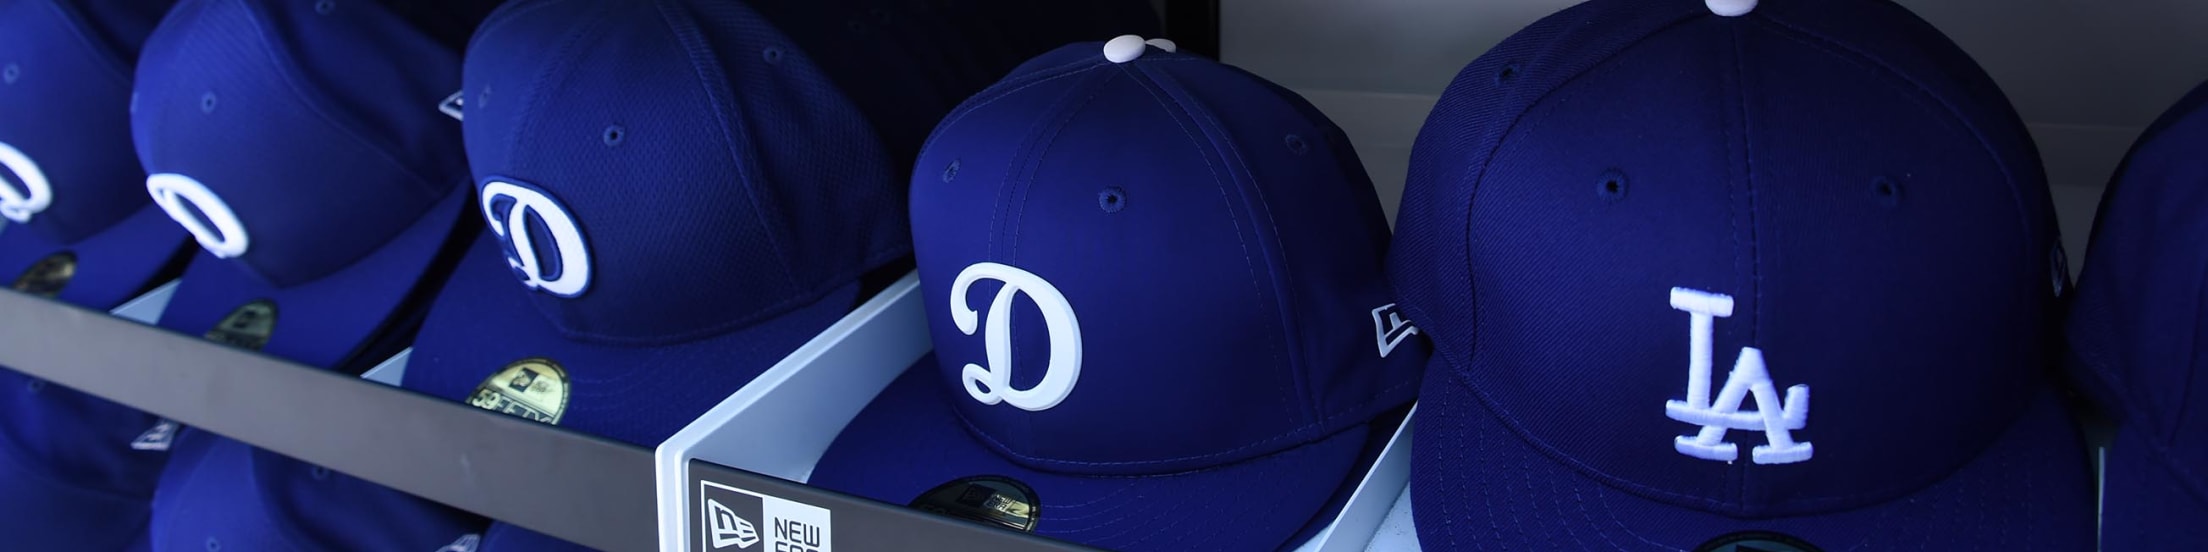 official dodgers store